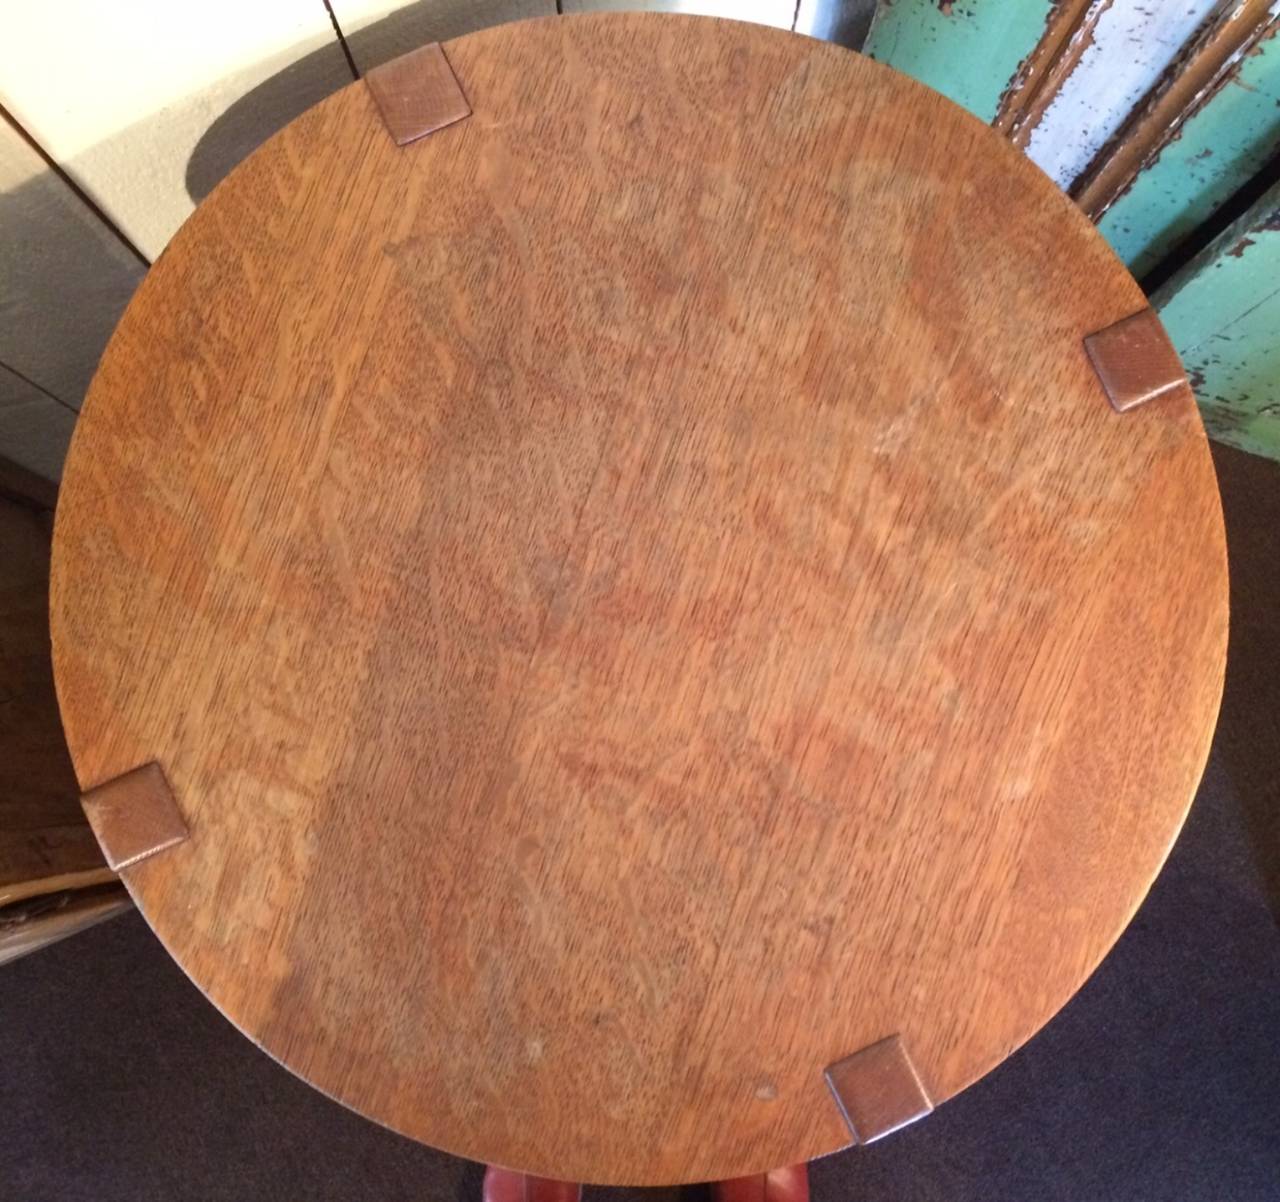 Stickley Brothers lamp table with vestiges of original paper tag. Structurally sound with minor fading and expected usage wear on table top surface.